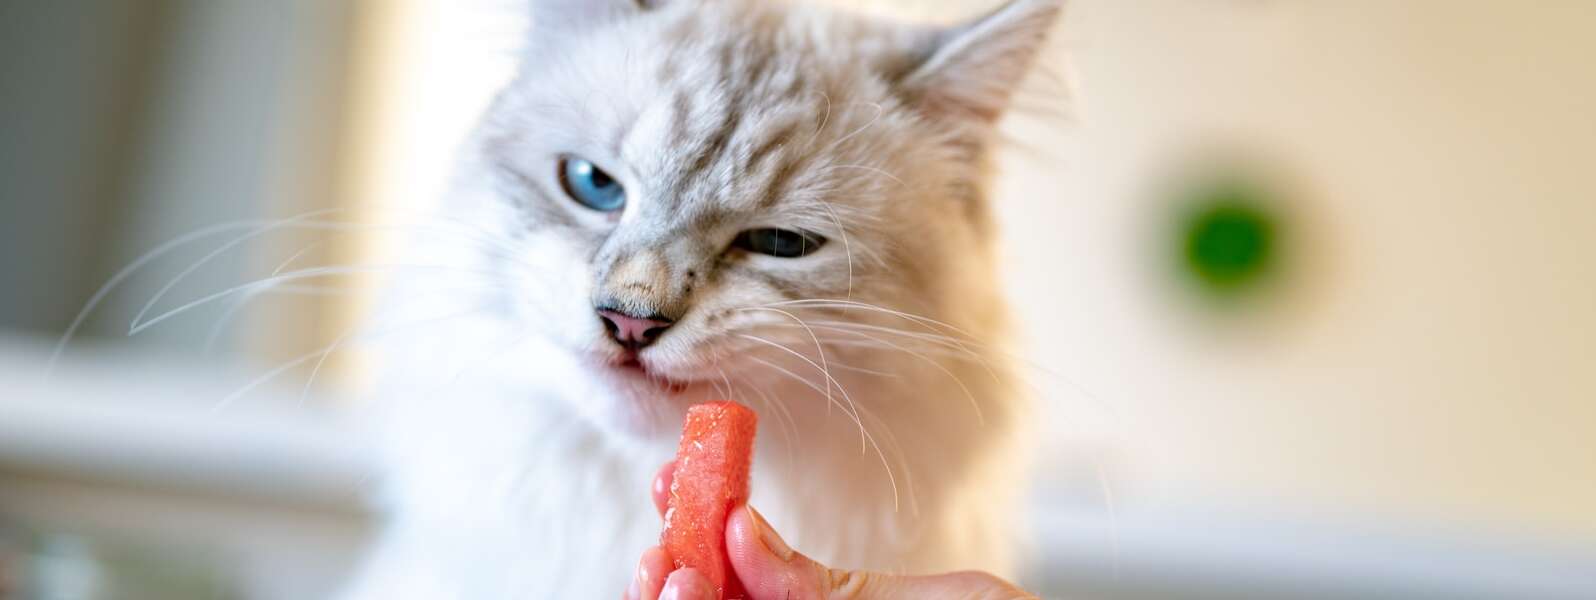 person offering carrot to cat